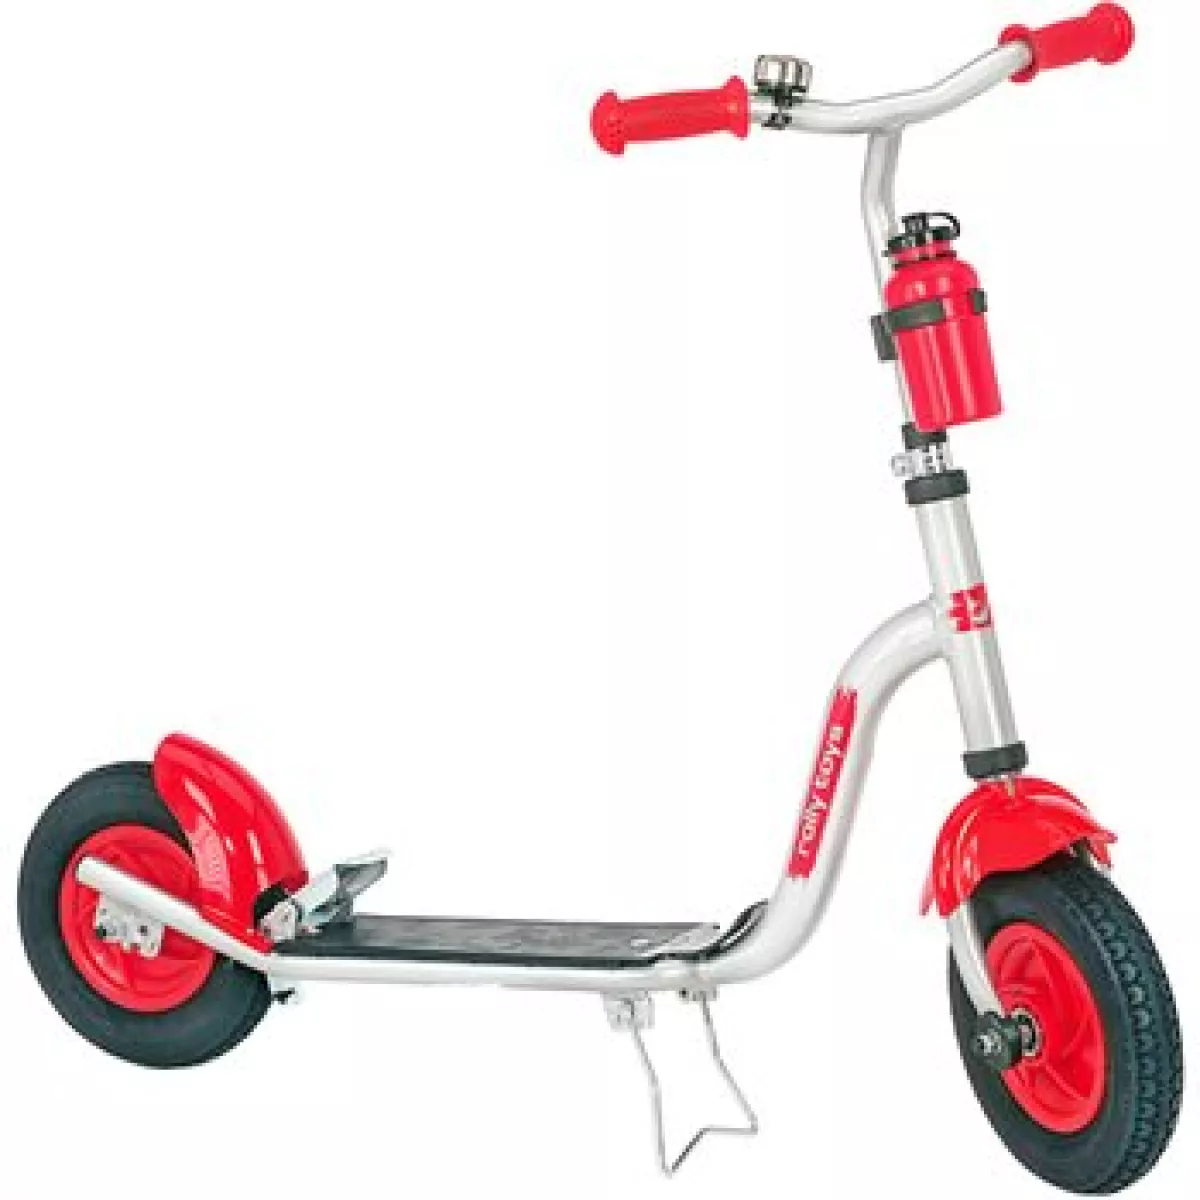 #1 - Rolly Toys Bambino løbehjul med luft